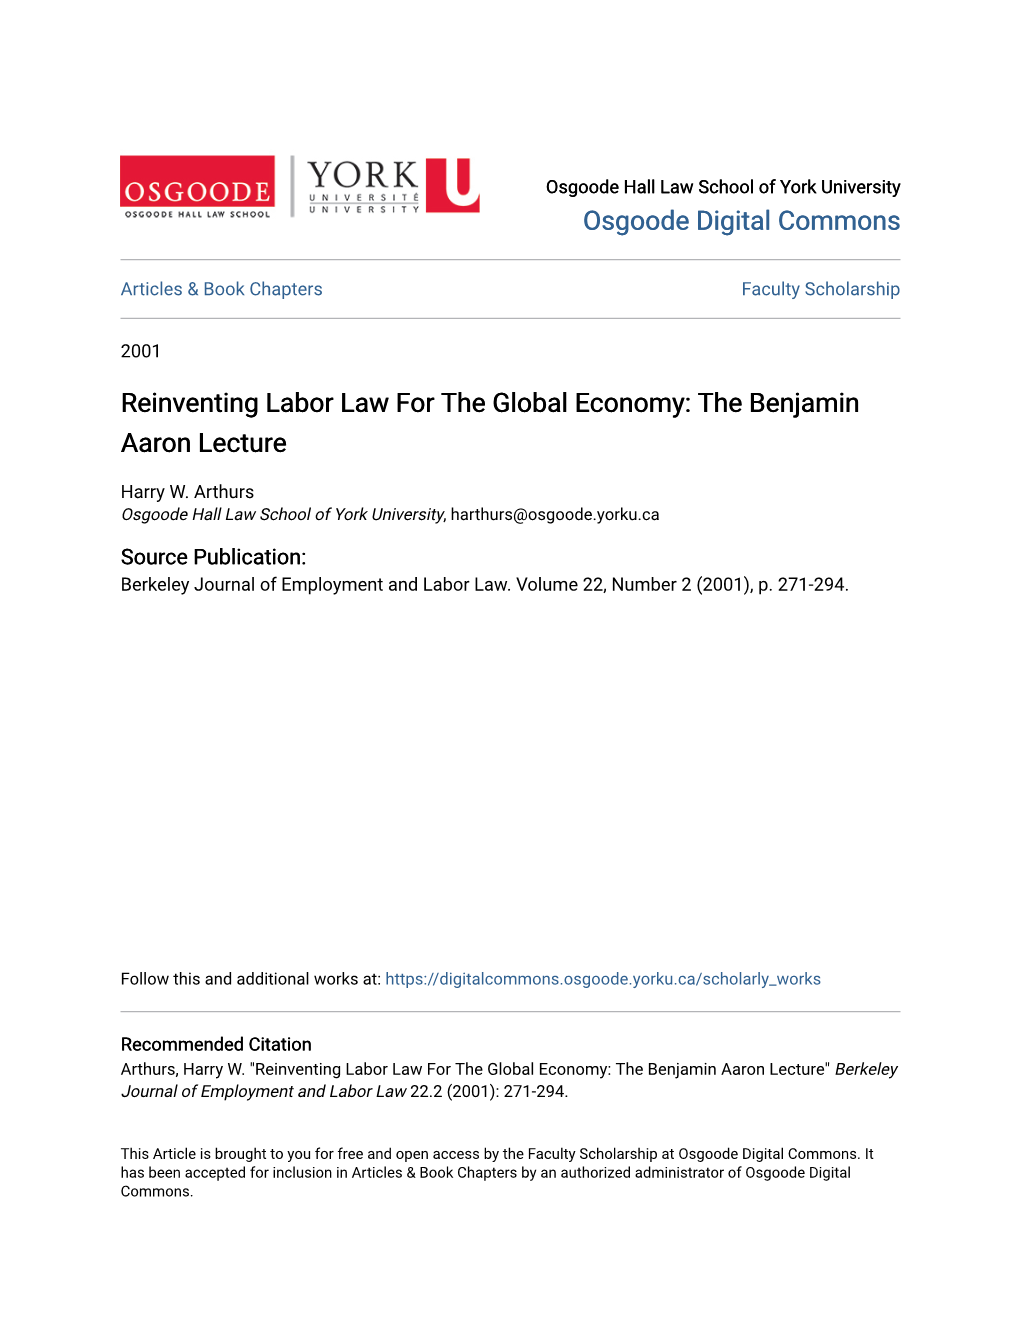 Reinventing Labor Law for the Global Economy: the Benjamin Aaron Lecture